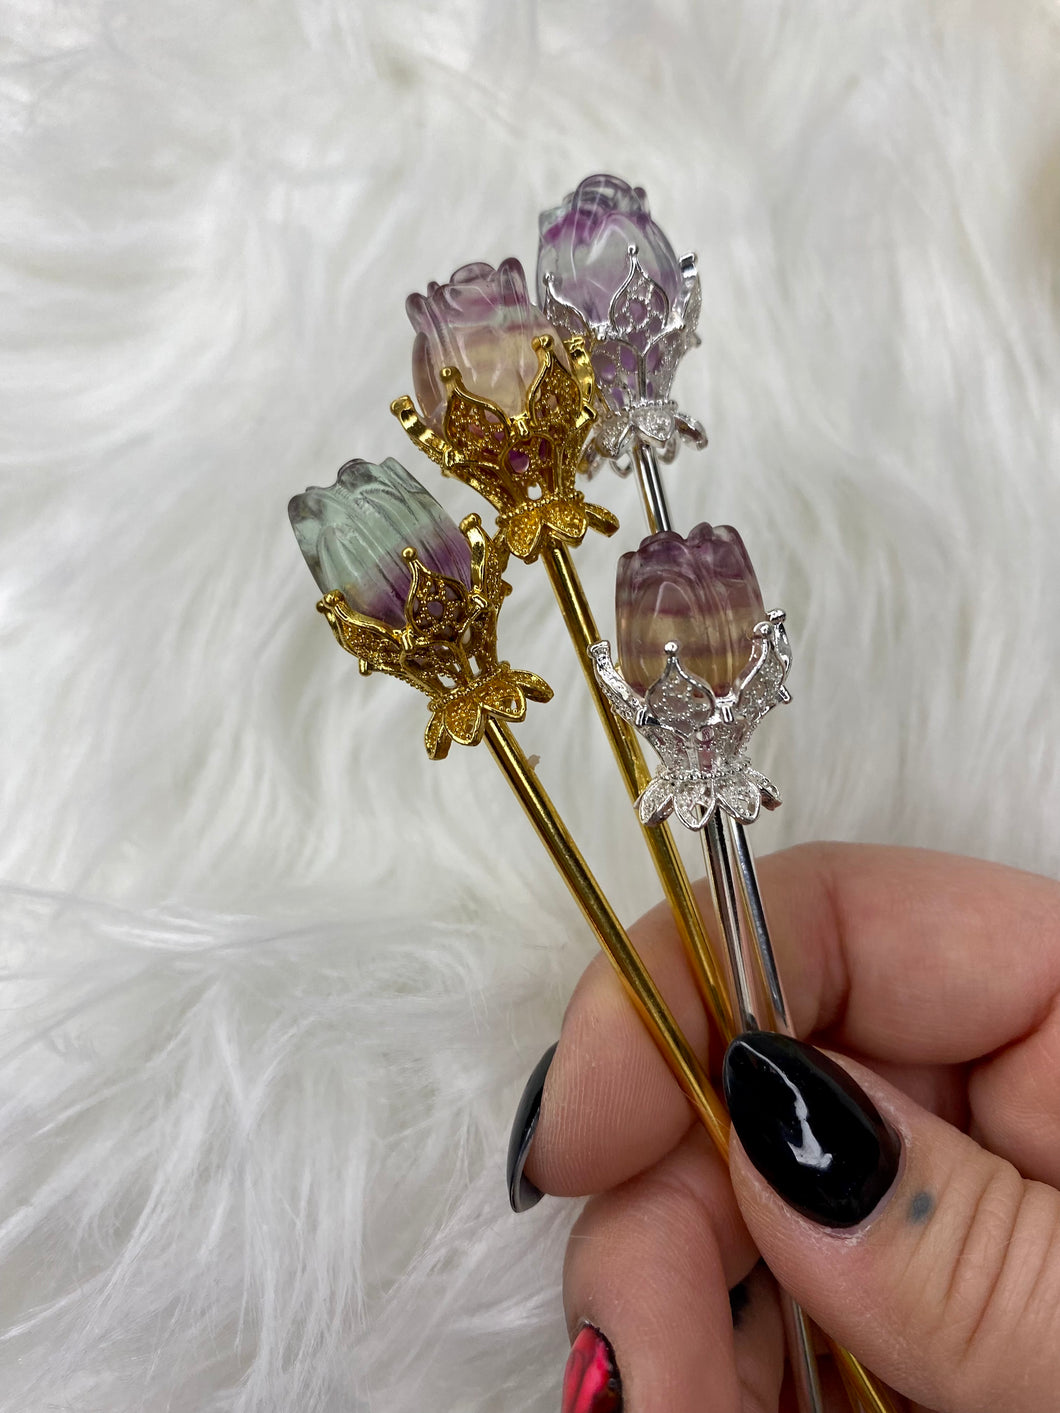 Crystal Roses with Metal Stems🌹